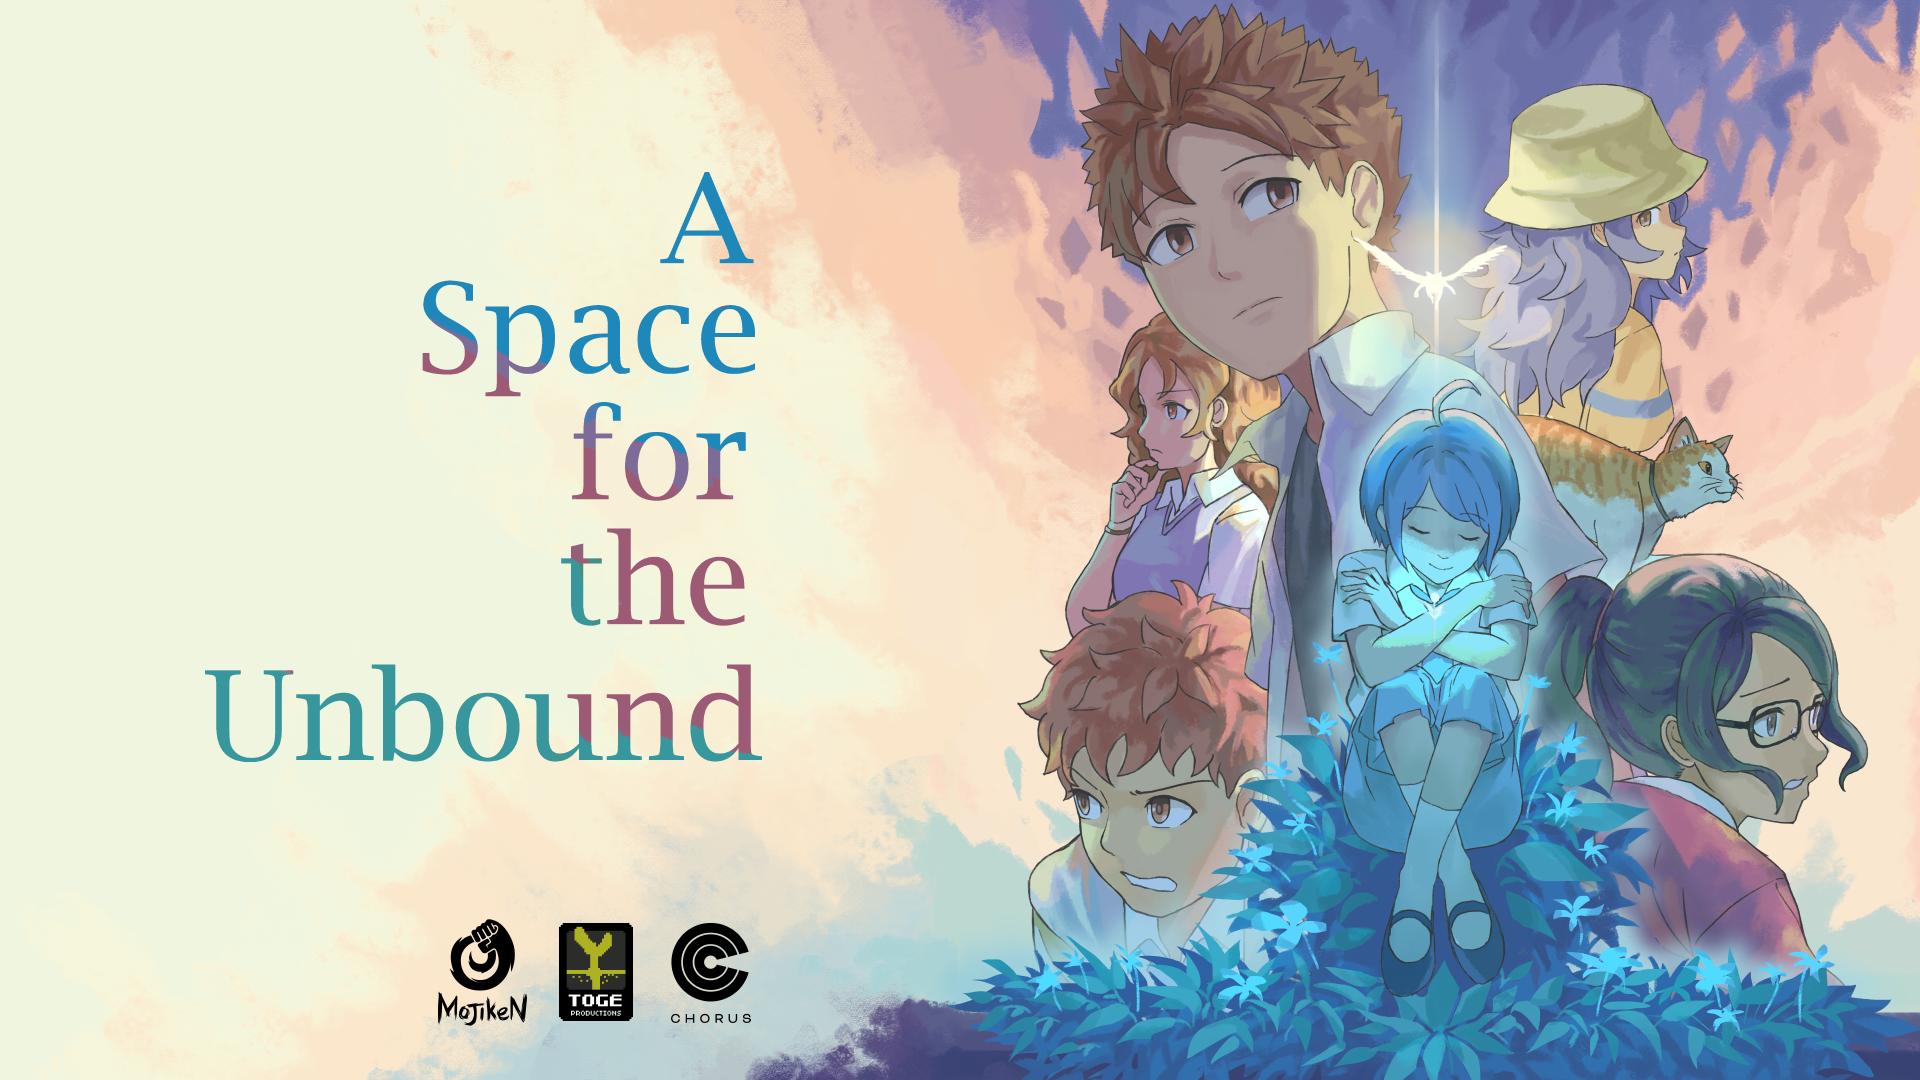 Buy A Space for the Unbound